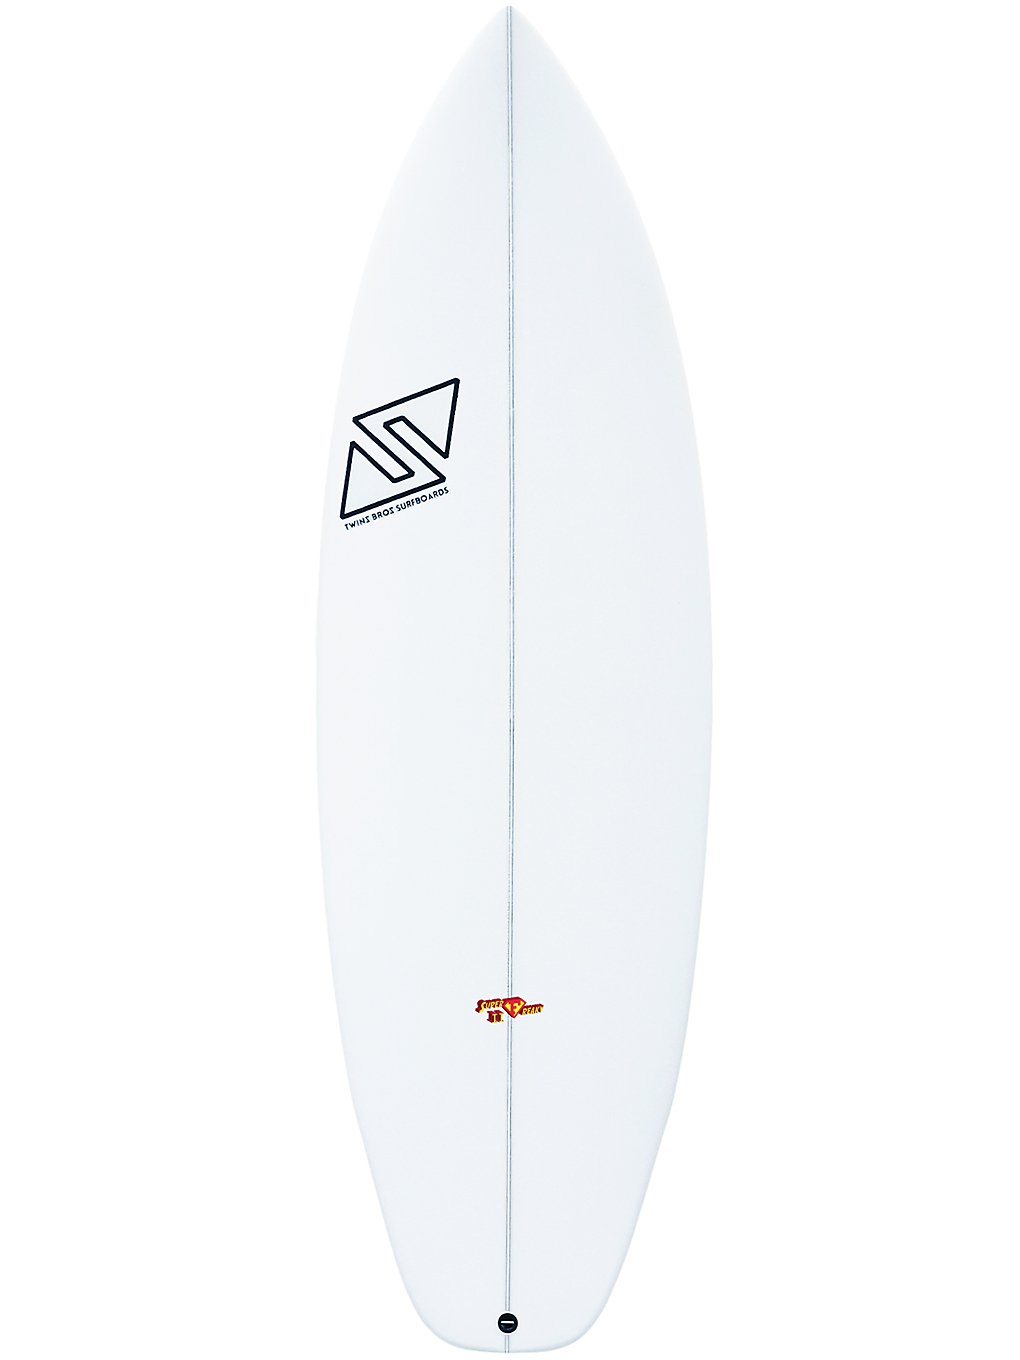 TwinsBros Superfreaky2 FCS2 5'11 Surfboard wit